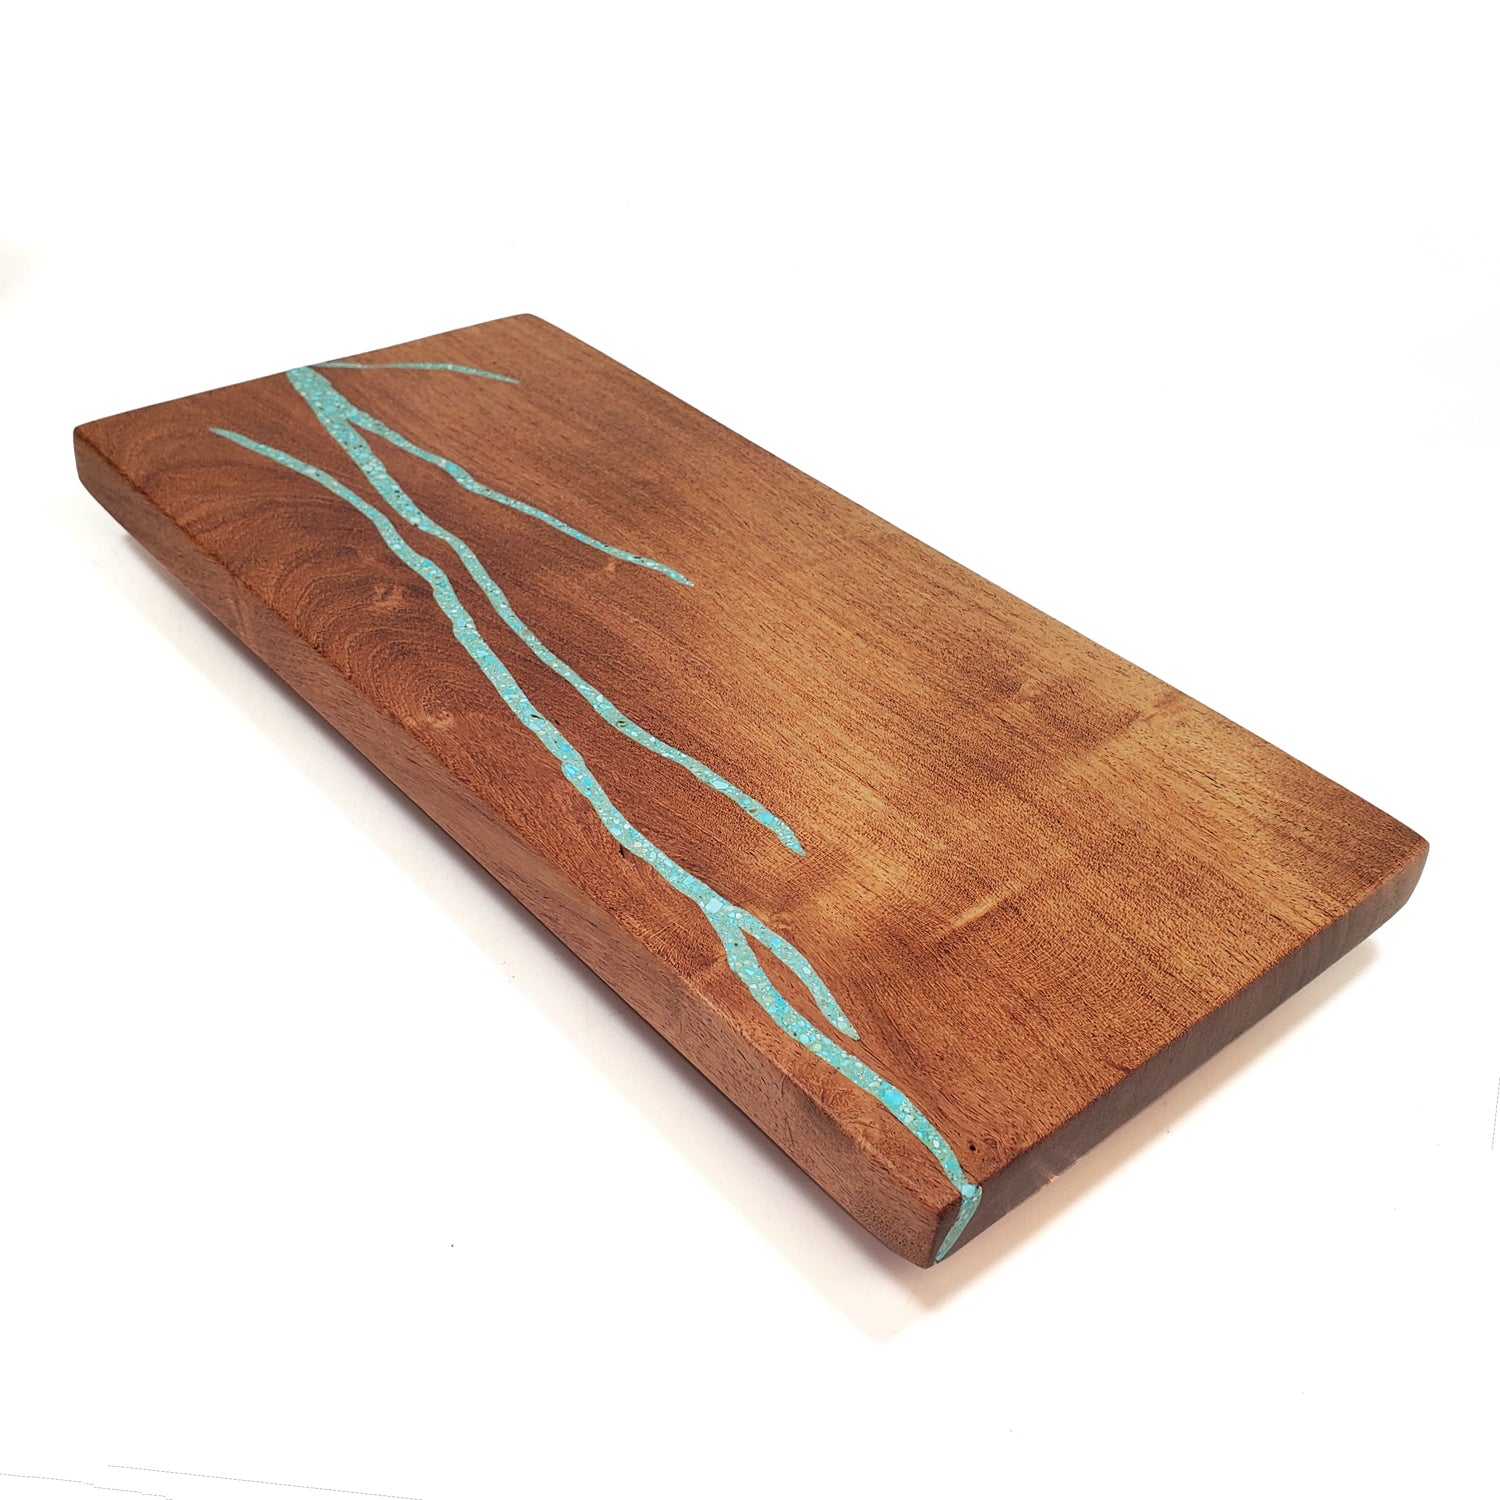 Mesquite Sushi Board with Turquoise Inlay